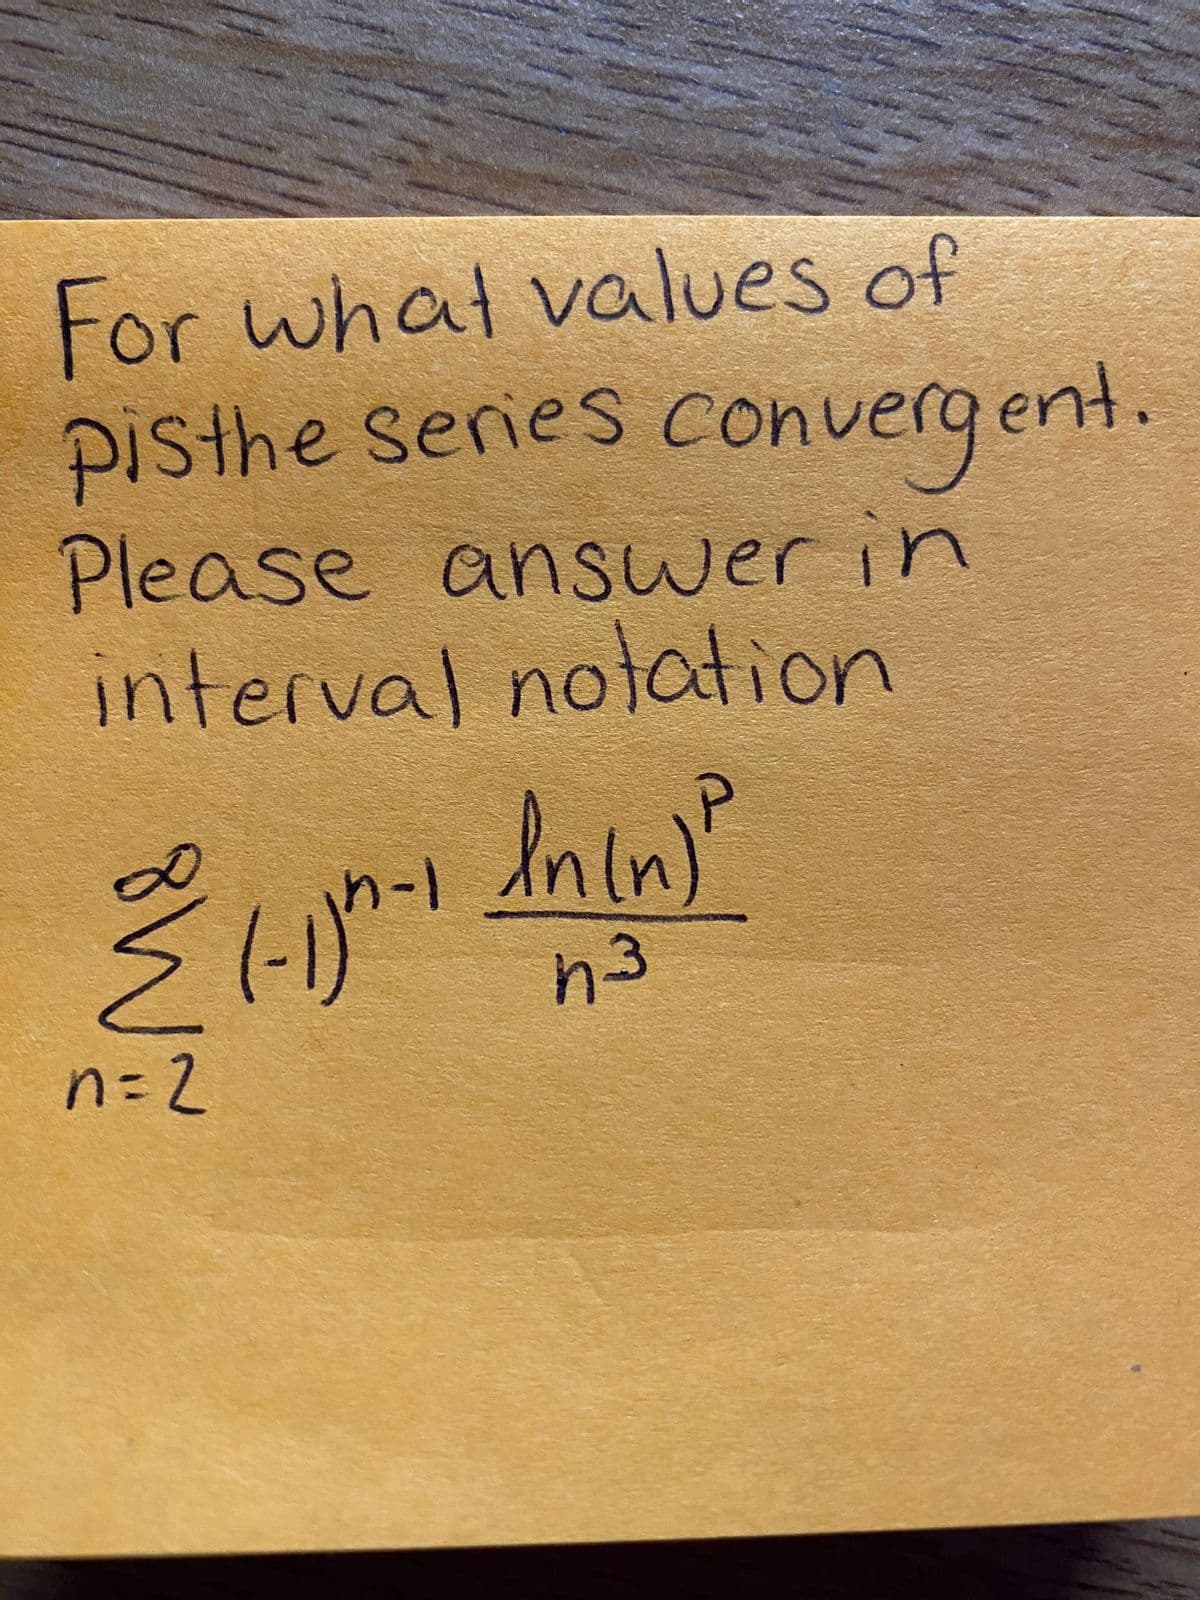 For what values of
pisthe series convergent.
Please answer in
interval notation
{ (-1)
n=2
(-)
In (n)P
h3